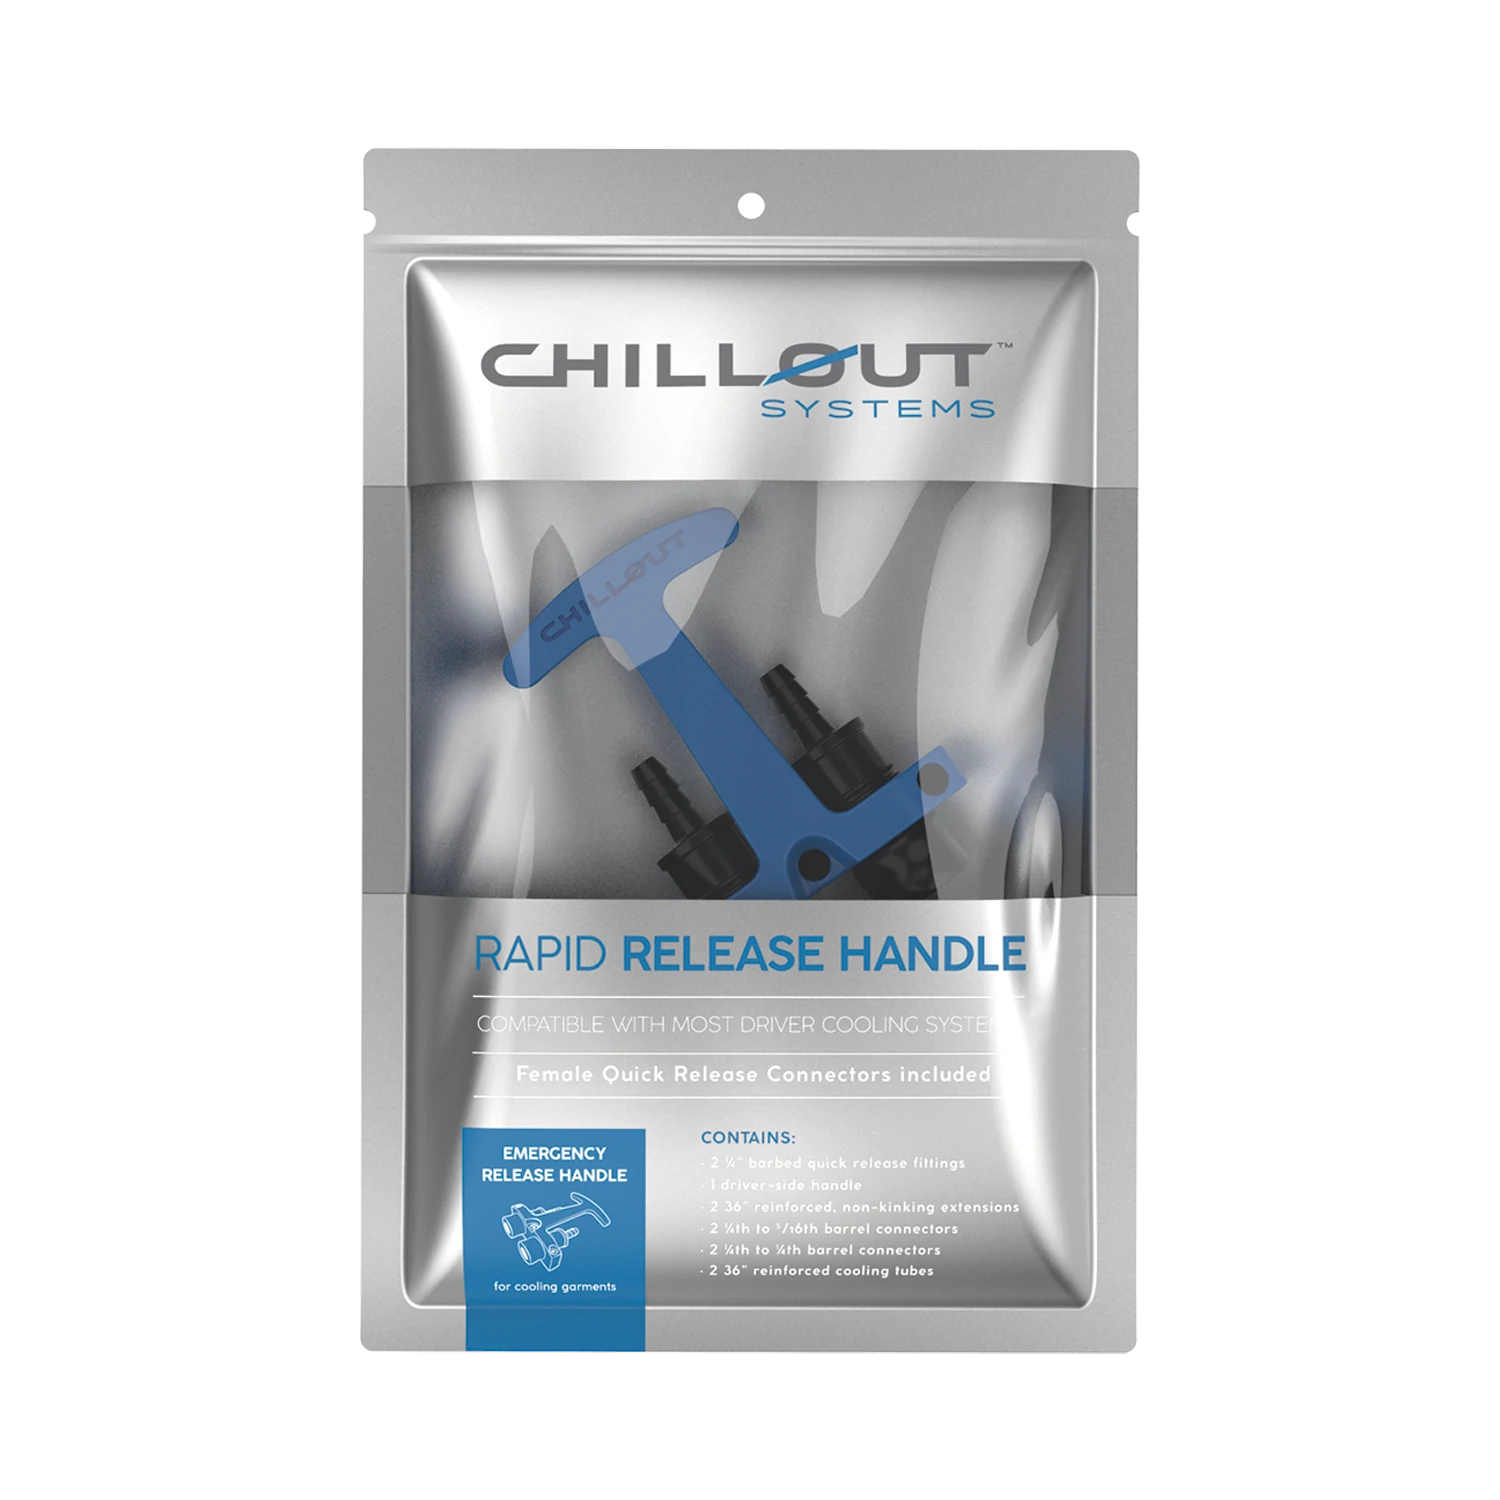 ChillOut Rapid Release Shirt Handle